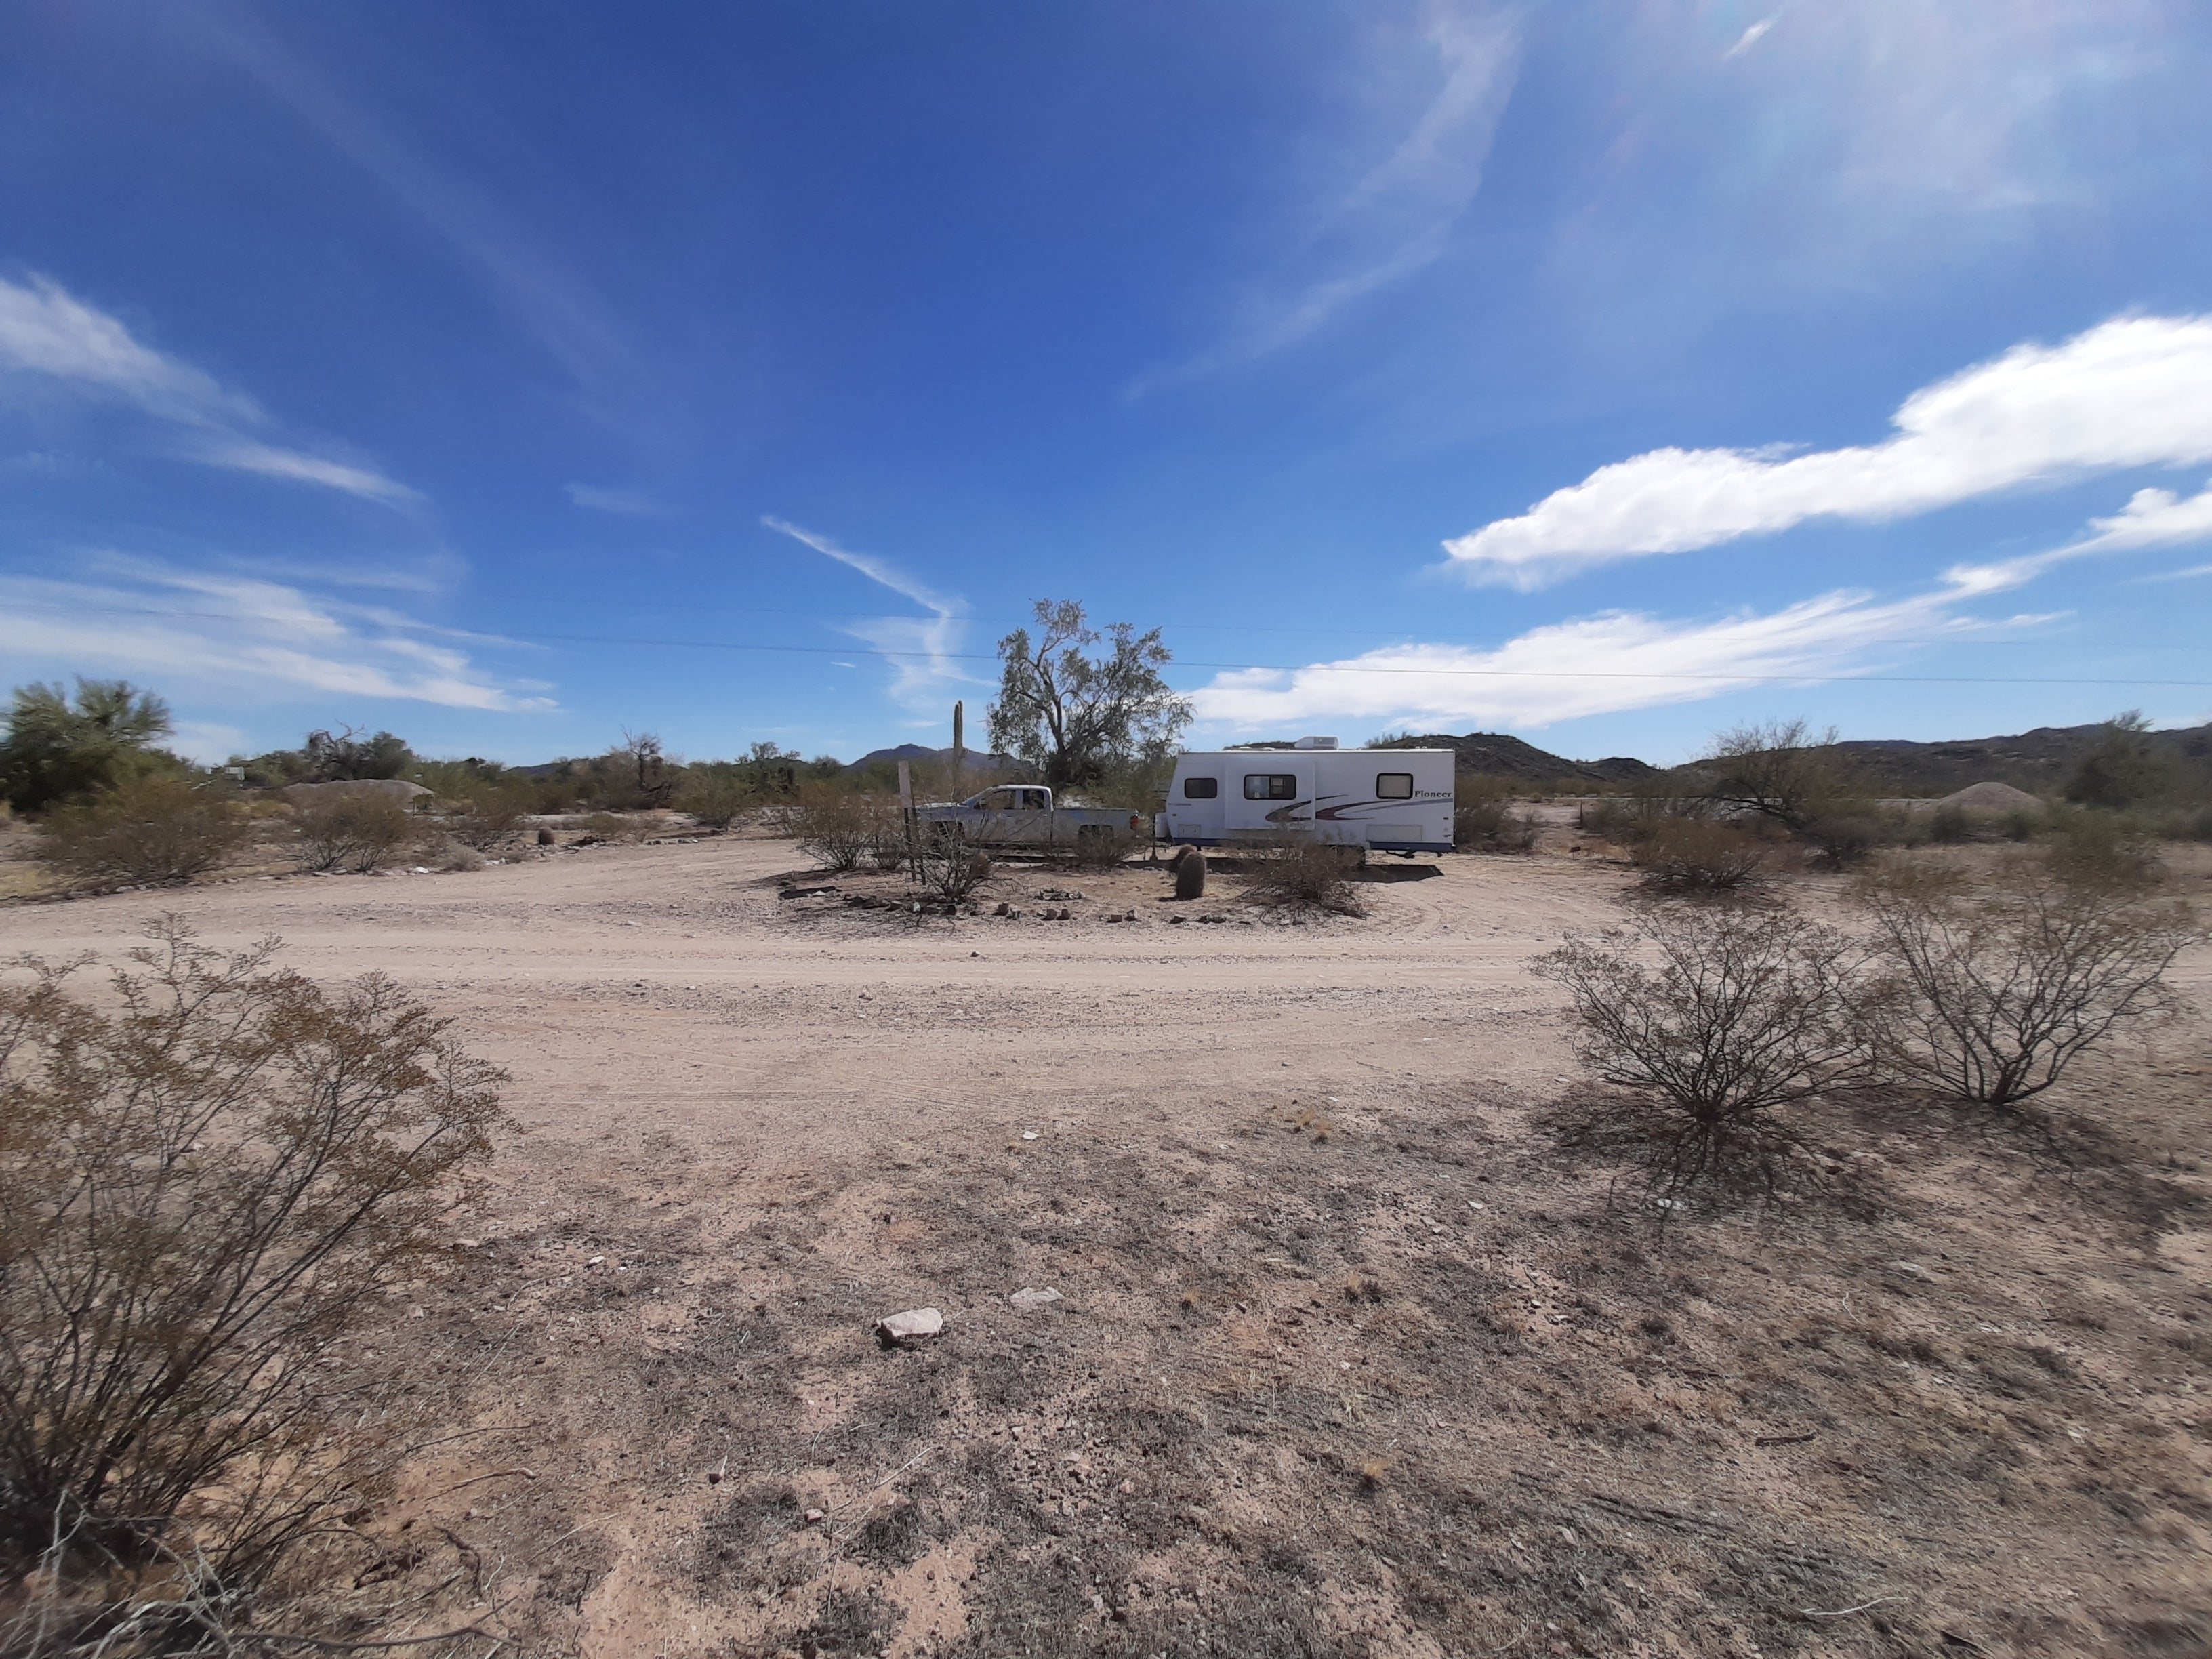 Camper submitted image from Gunsight Wash BLM Dispersed camping atea - 5